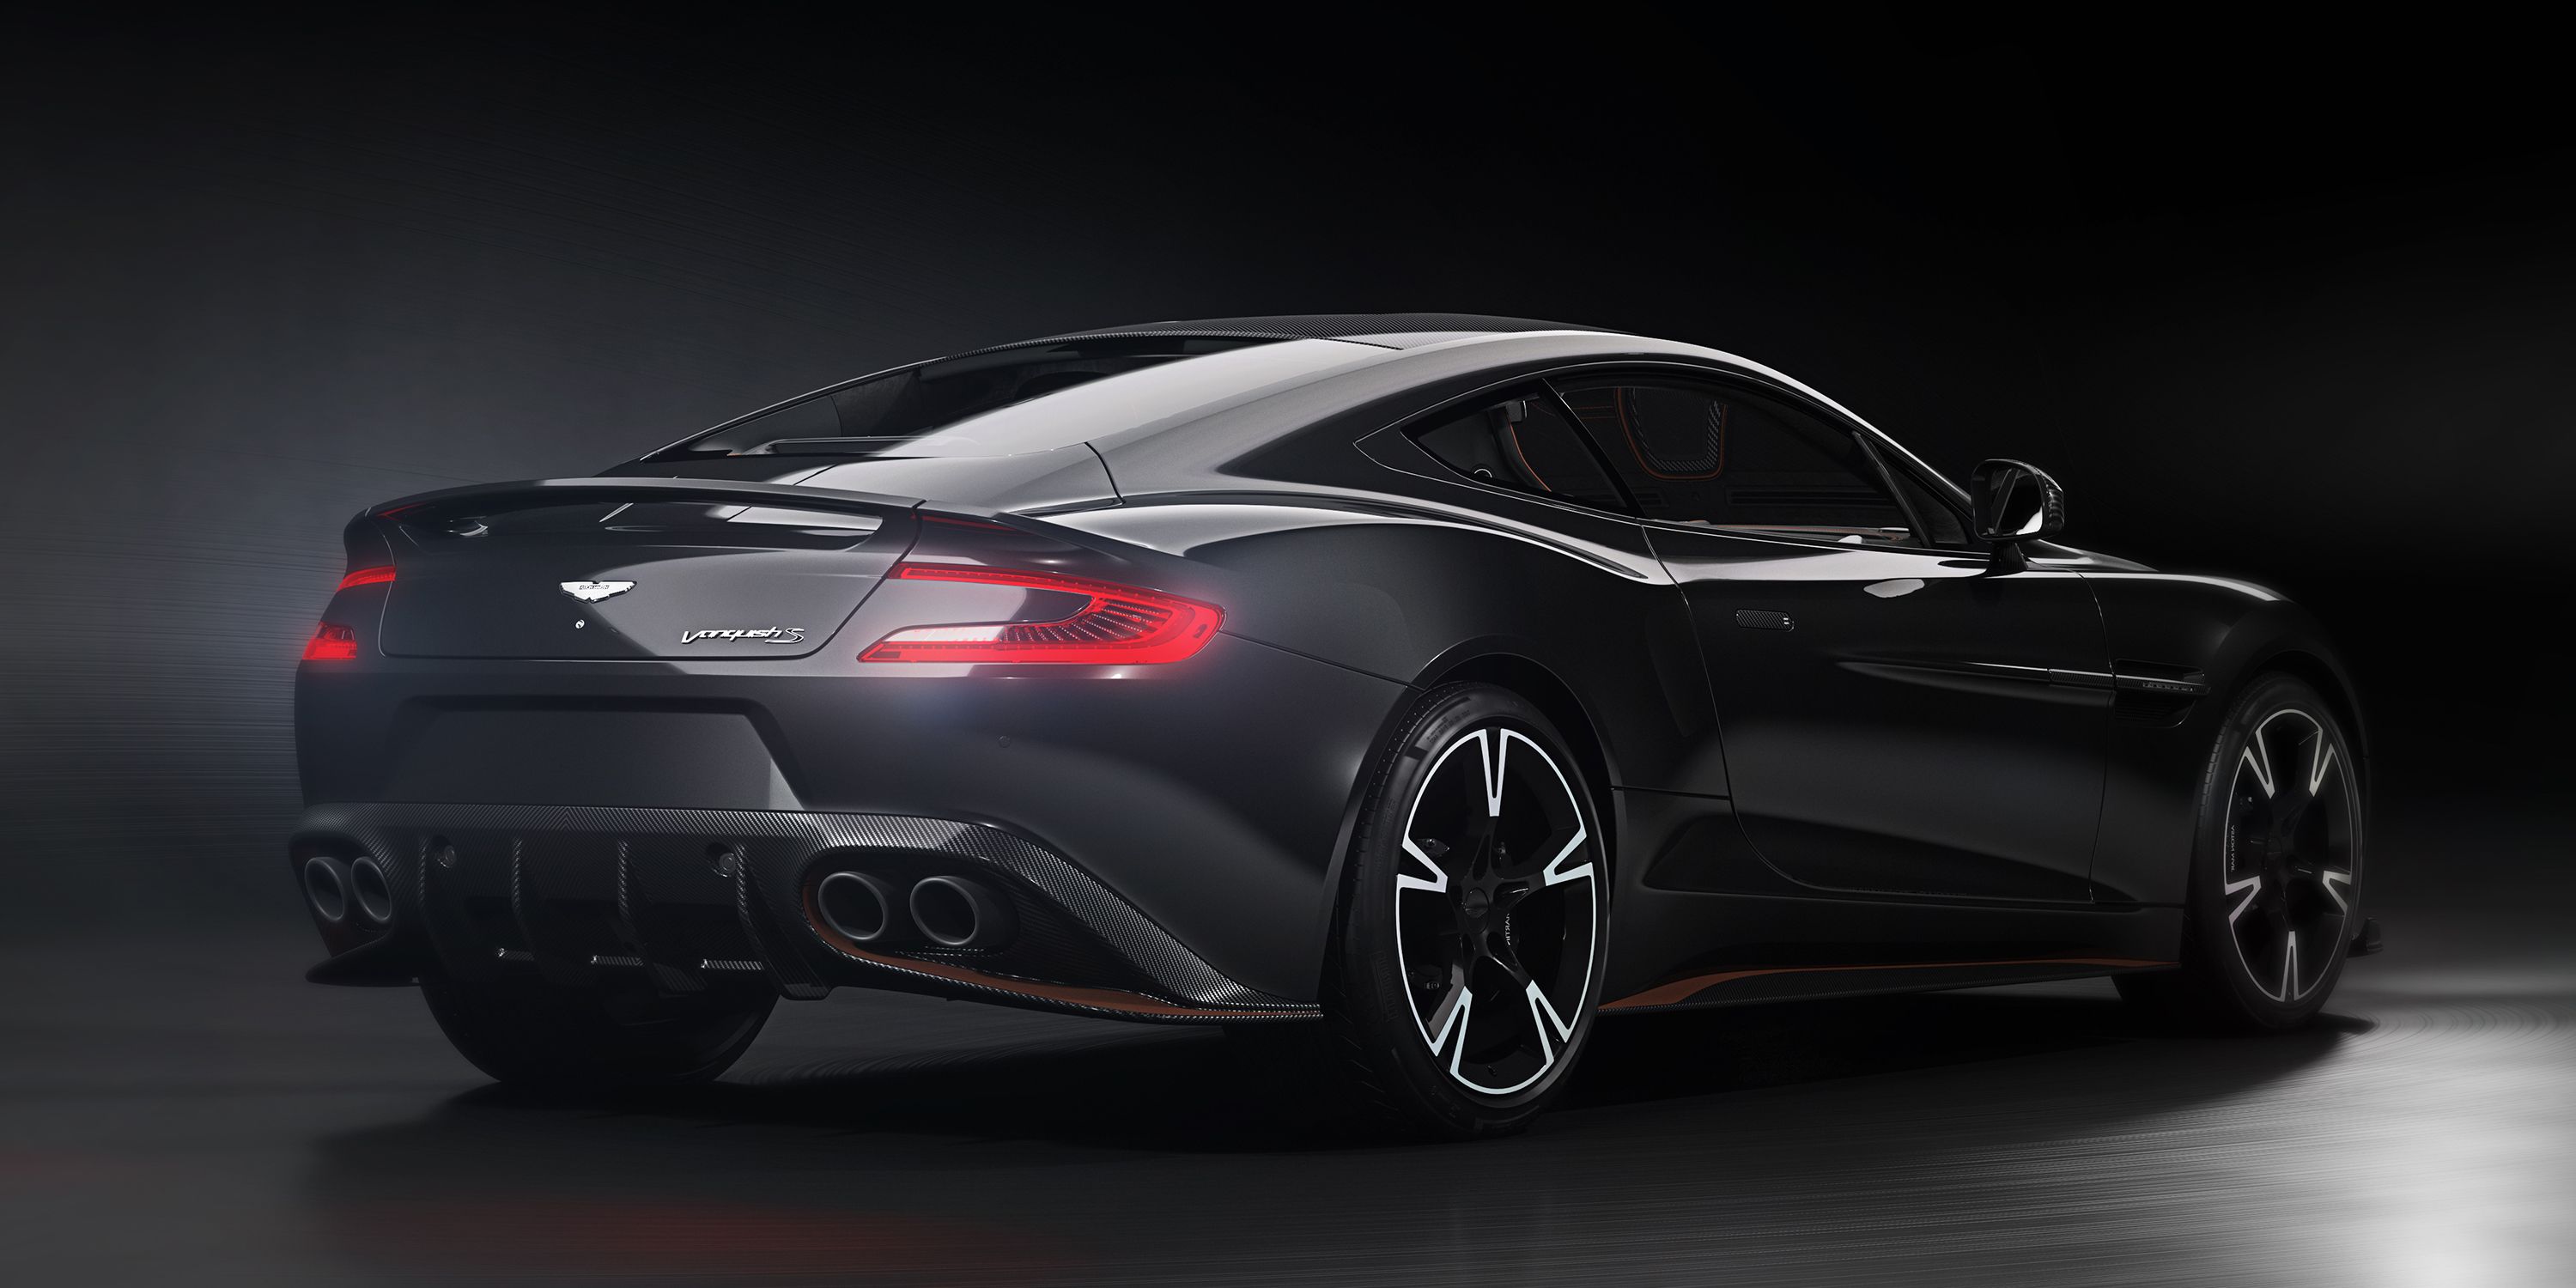 This Is the End of the Line For the Current Aston Martin Vanquish